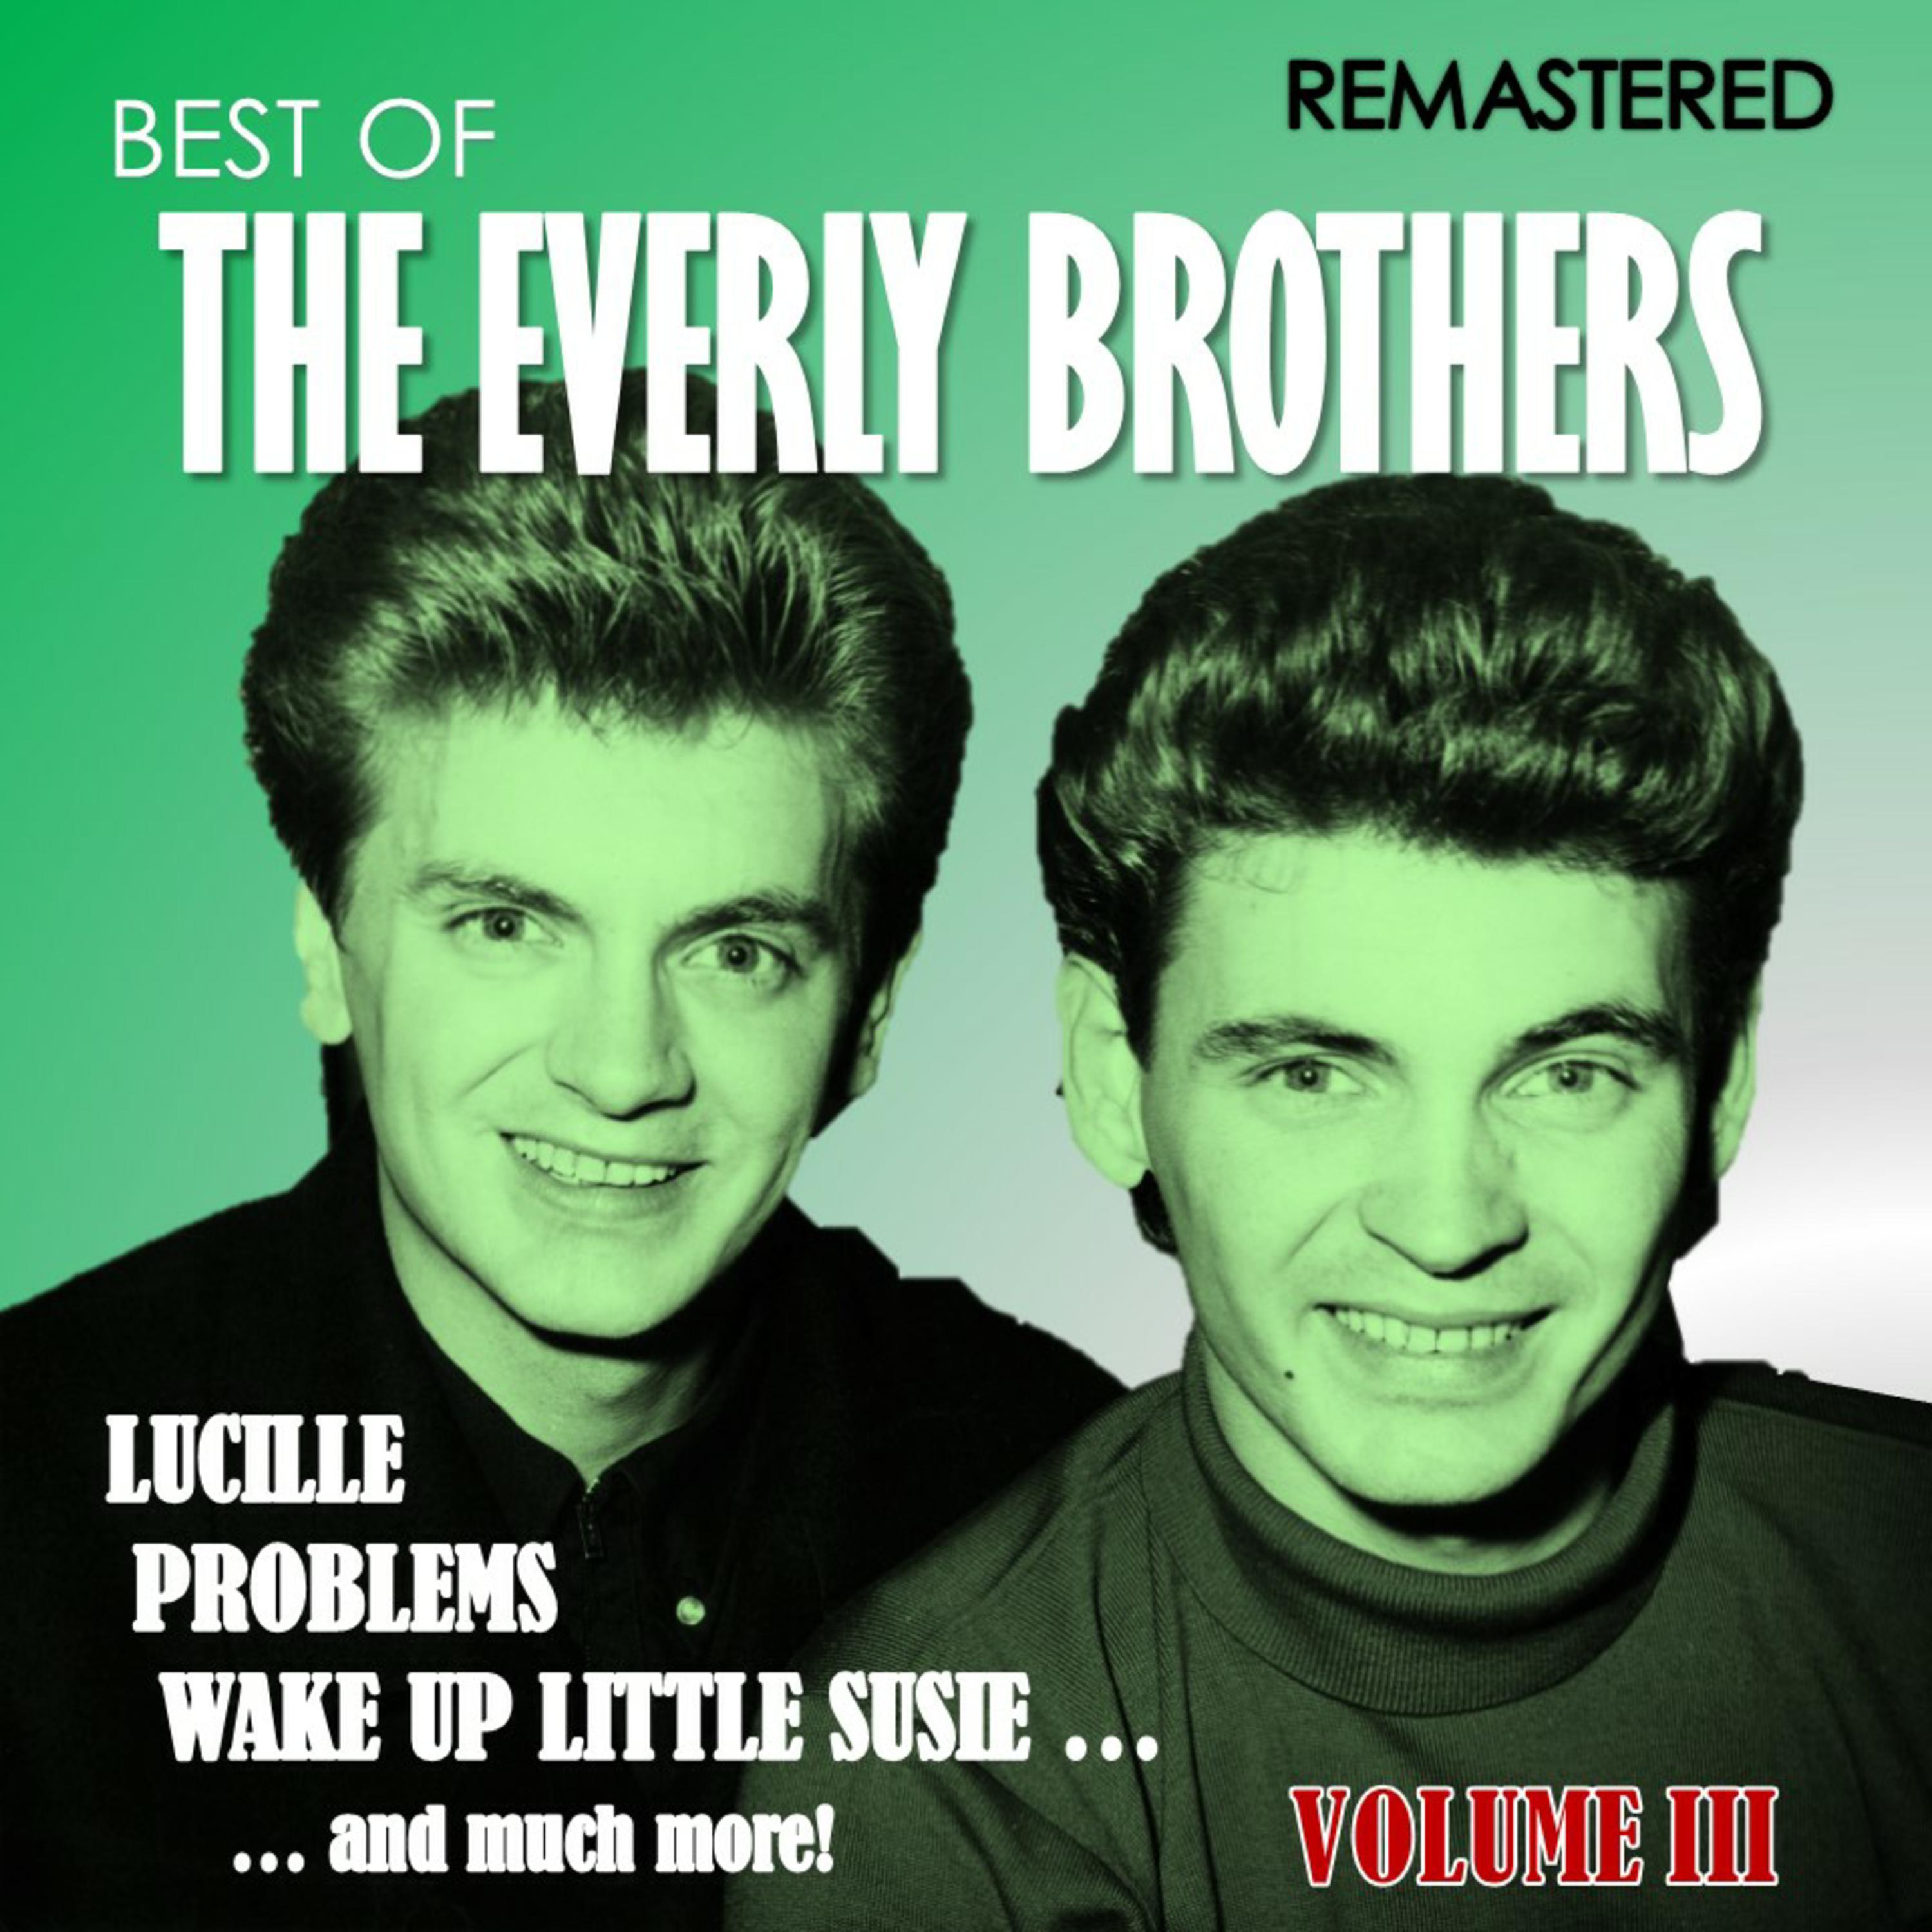 Best of The Everly Brothers, Vol. III (Remastered)